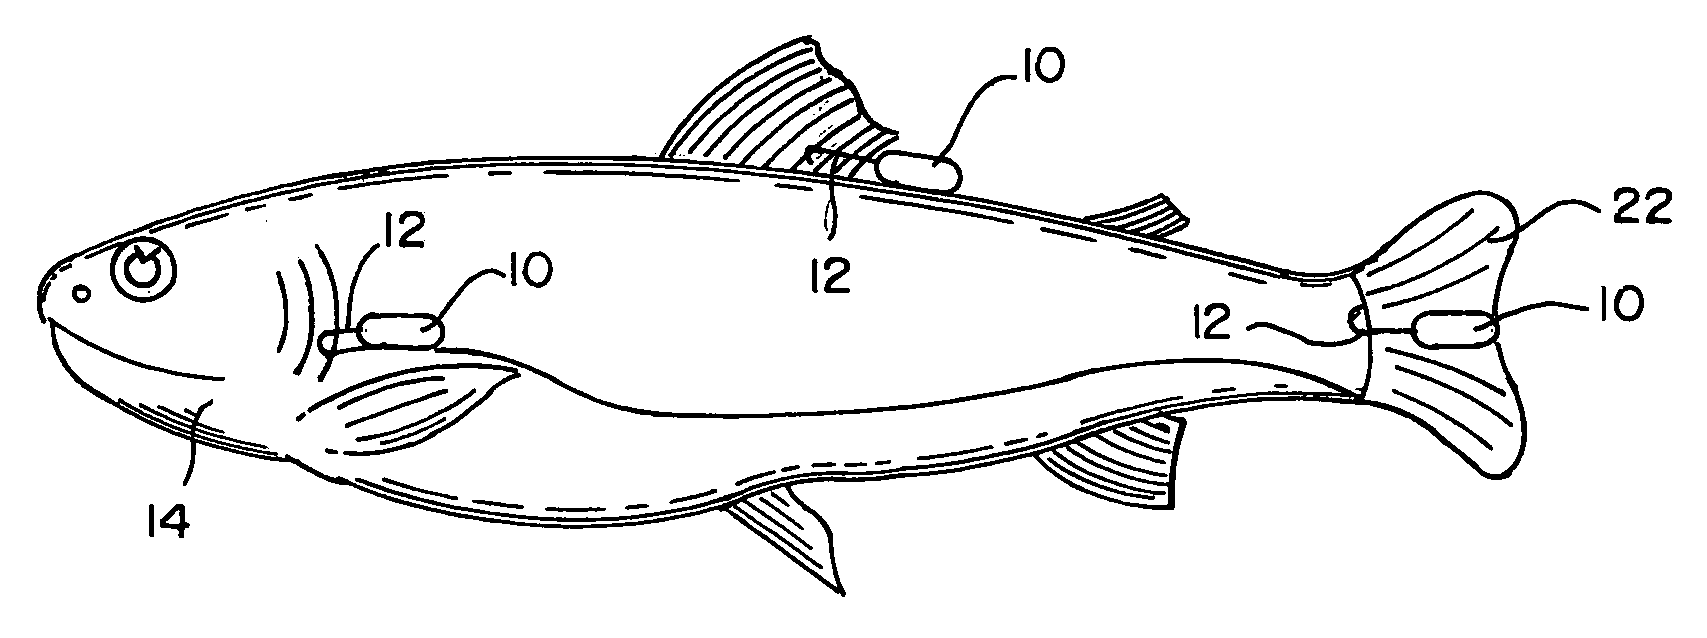 System for reducing the number of predator fish